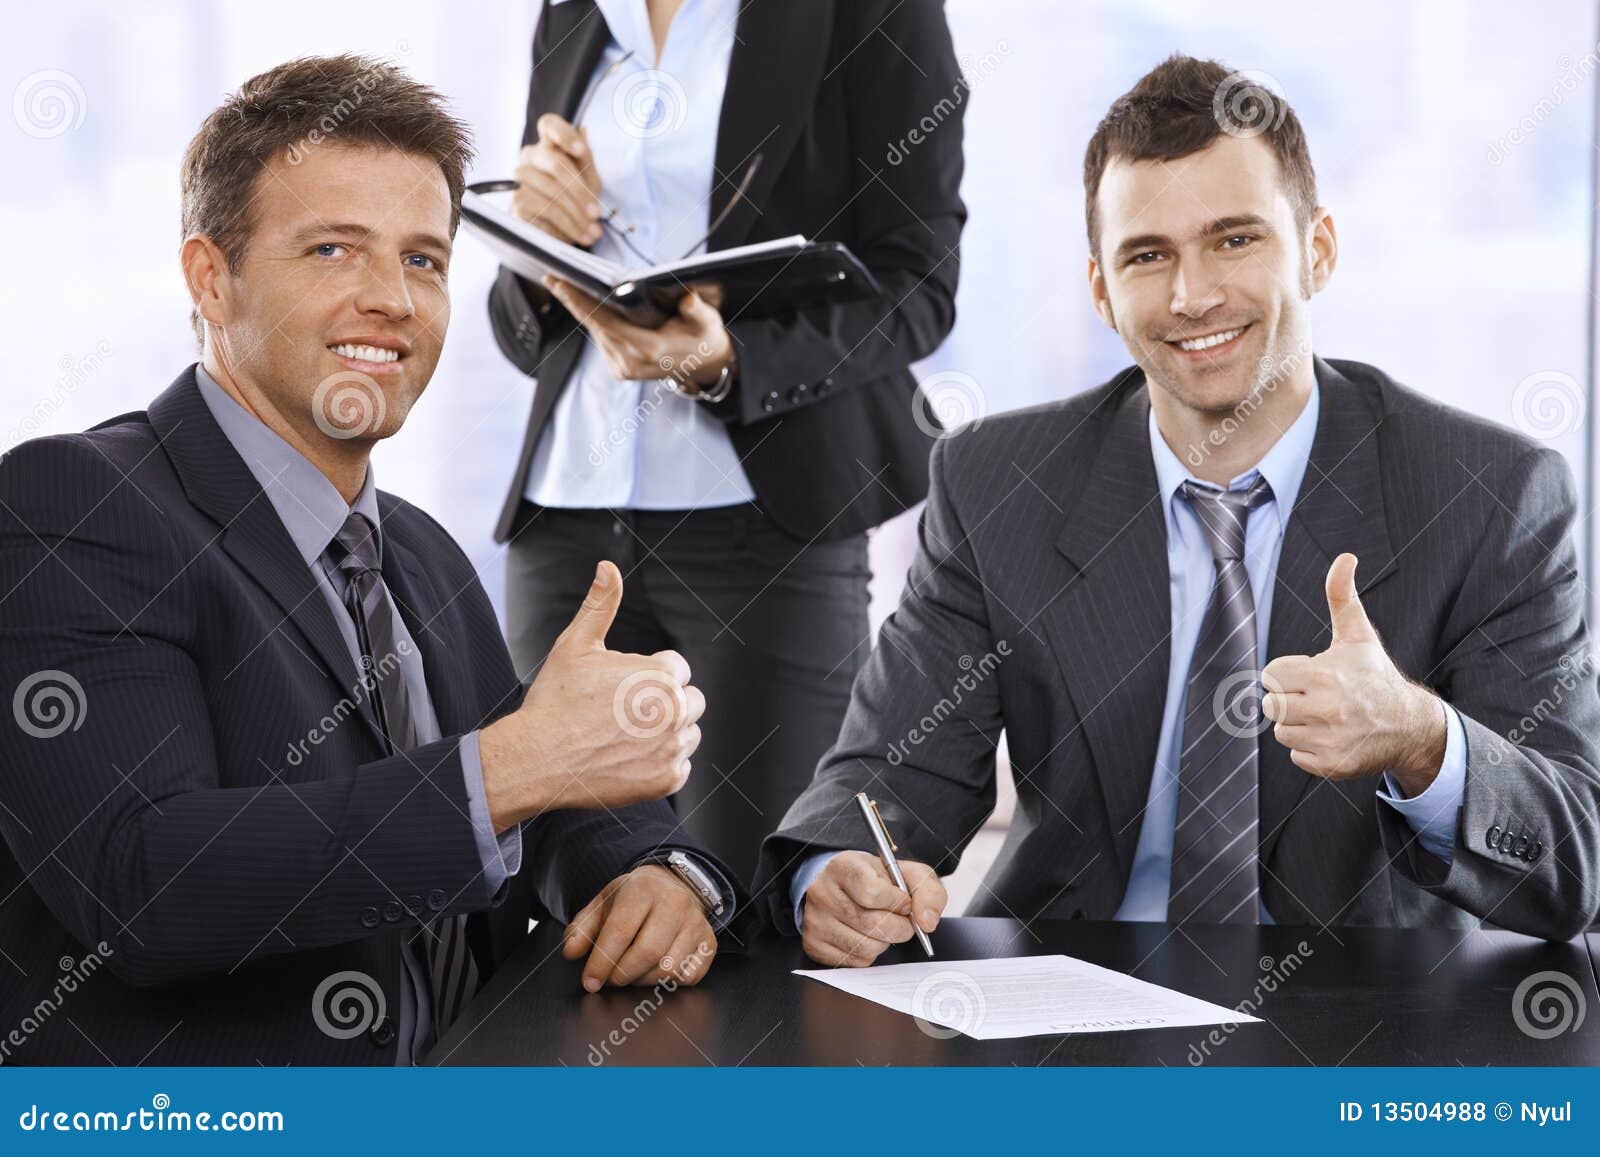 businessmen giving the thumbs up, smiling